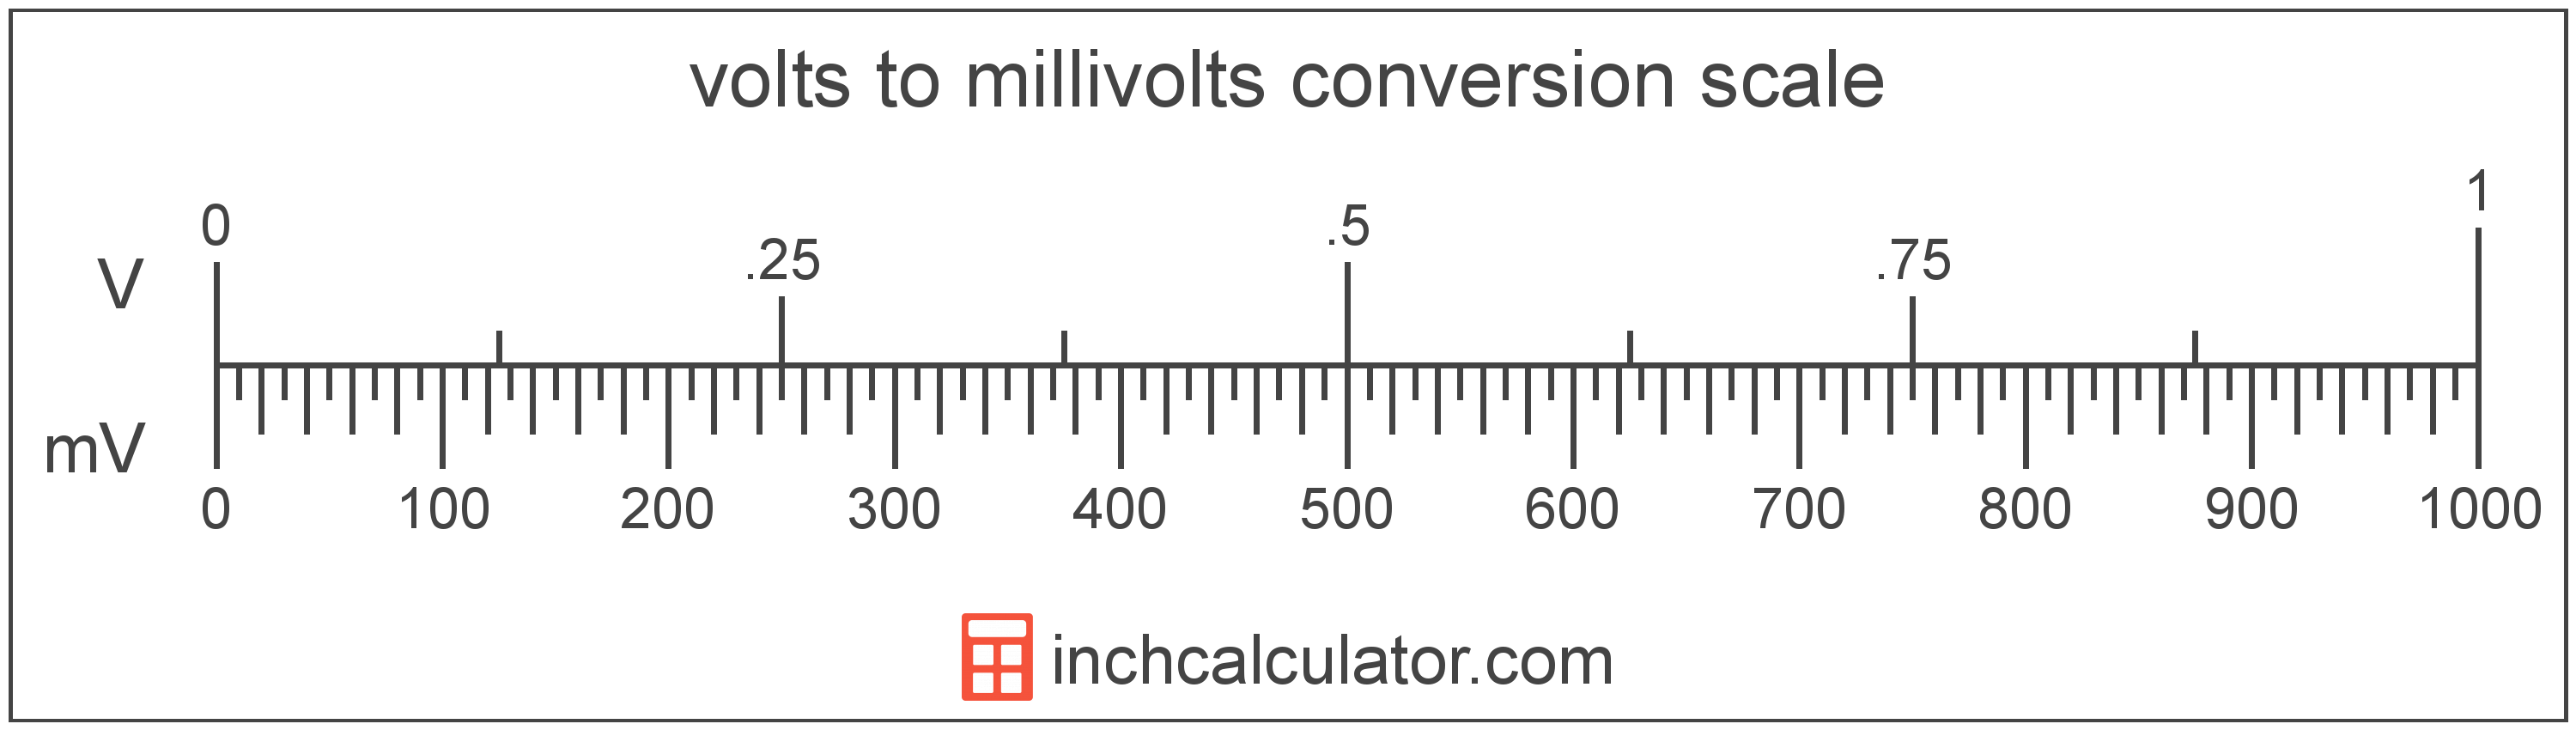 conversion scale showing millivolts and equivalent volts voltage values